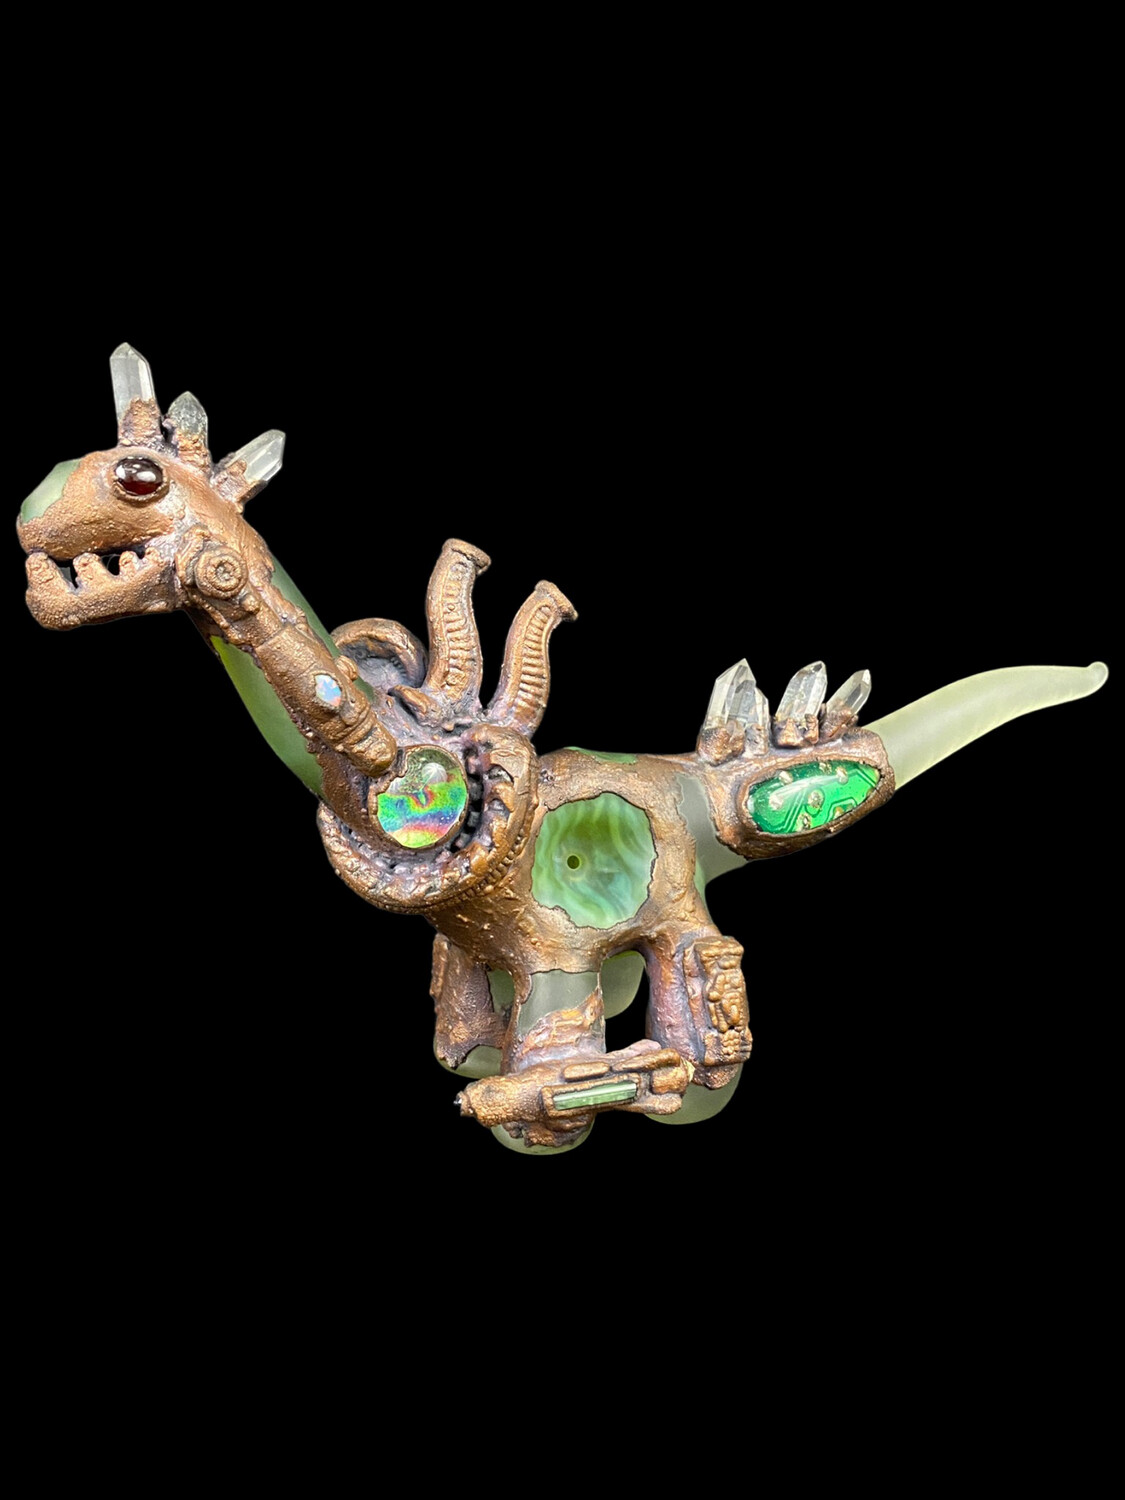 FL Heat - Ryan Vincent Sauger - Post Apocalyptic Dino Fighter Pipe